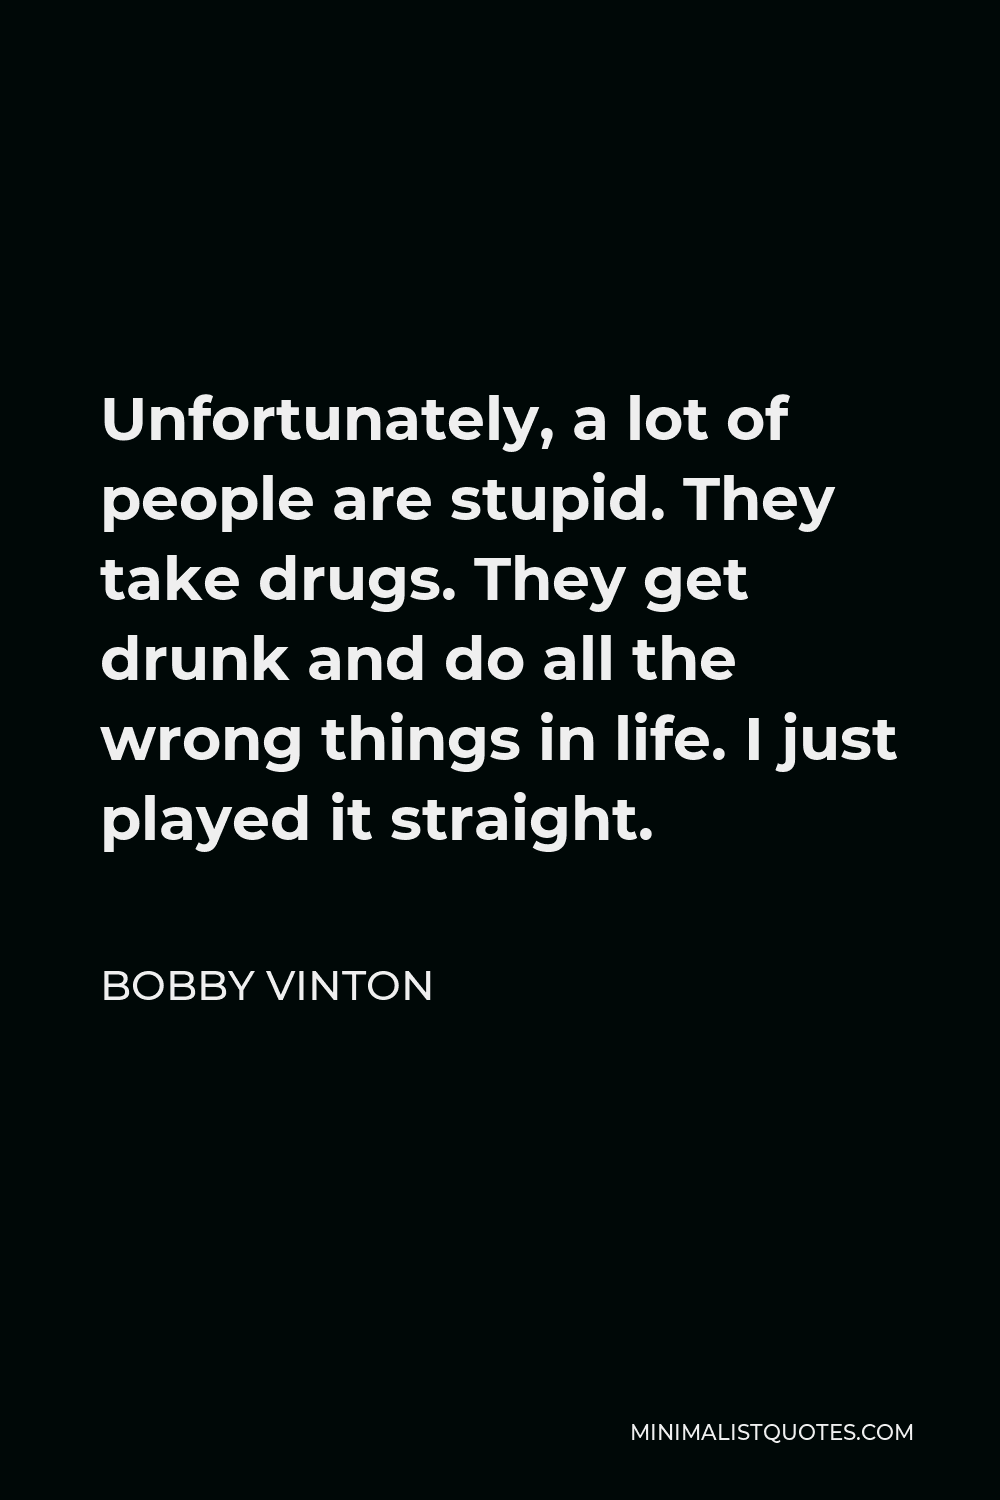 Bobby Vinton Quote - Unfortunately, a lot of people are stupid. They take drugs. They get drunk and do all the wrong things in life. I just played it straight.